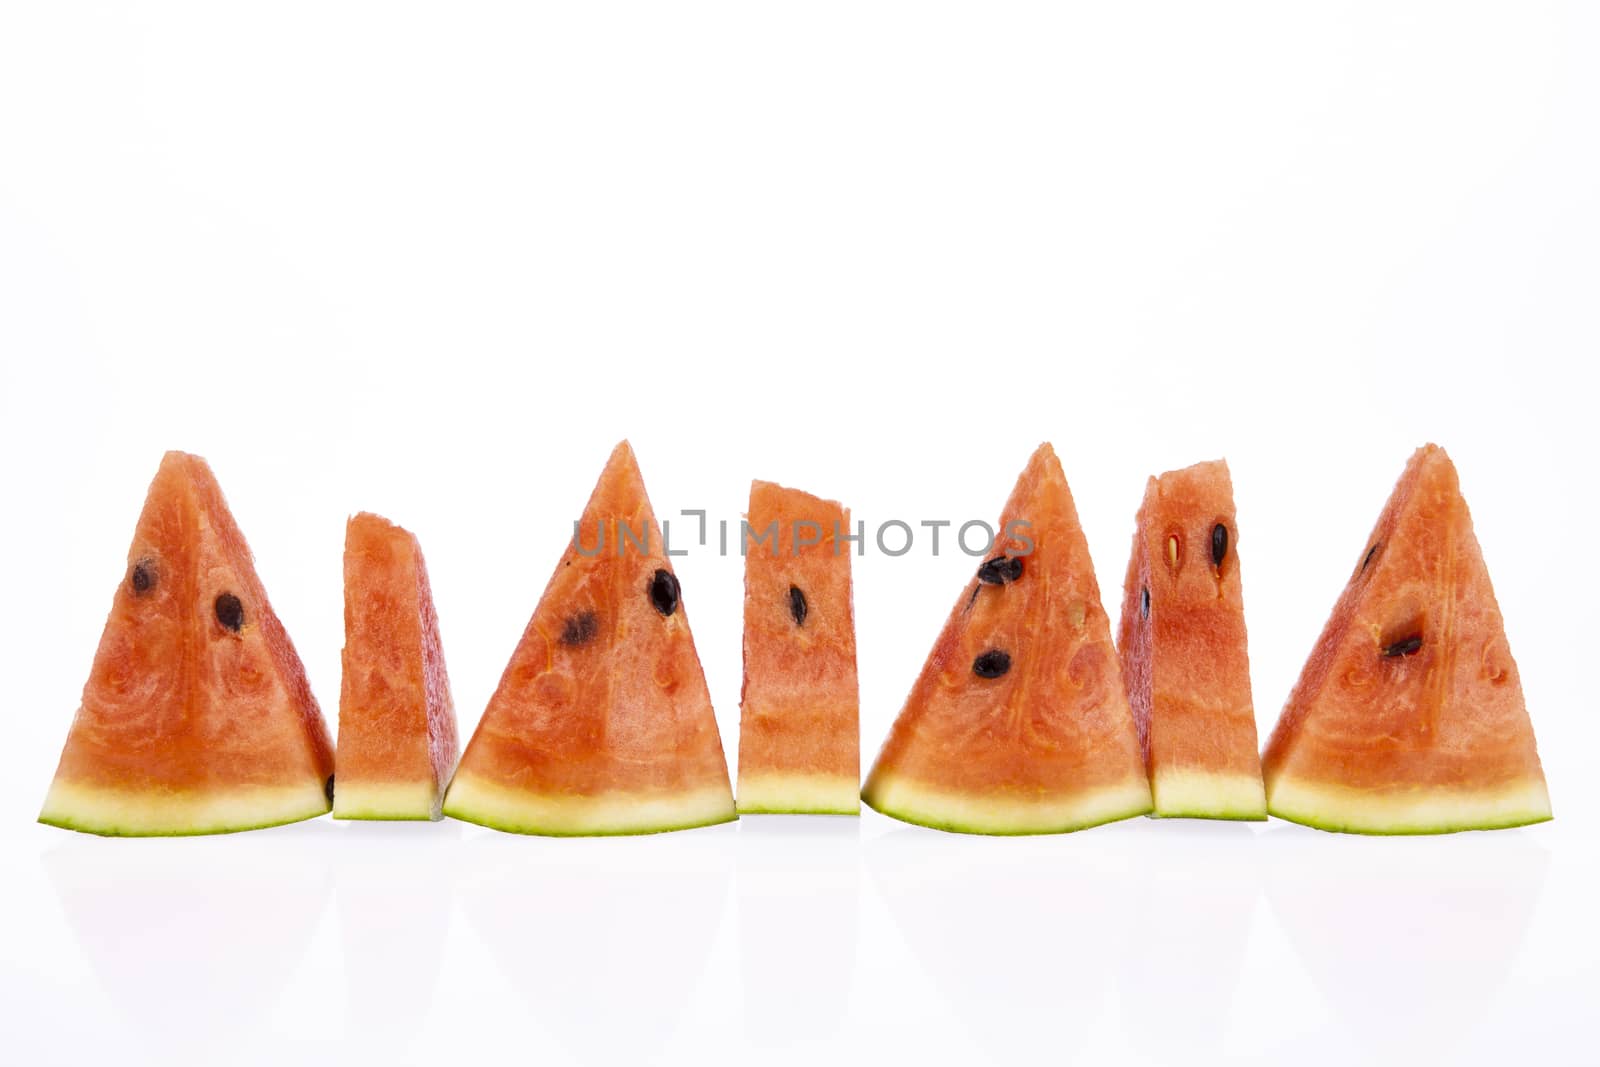 Typical and delicious slice of watermelon with whole watermelon